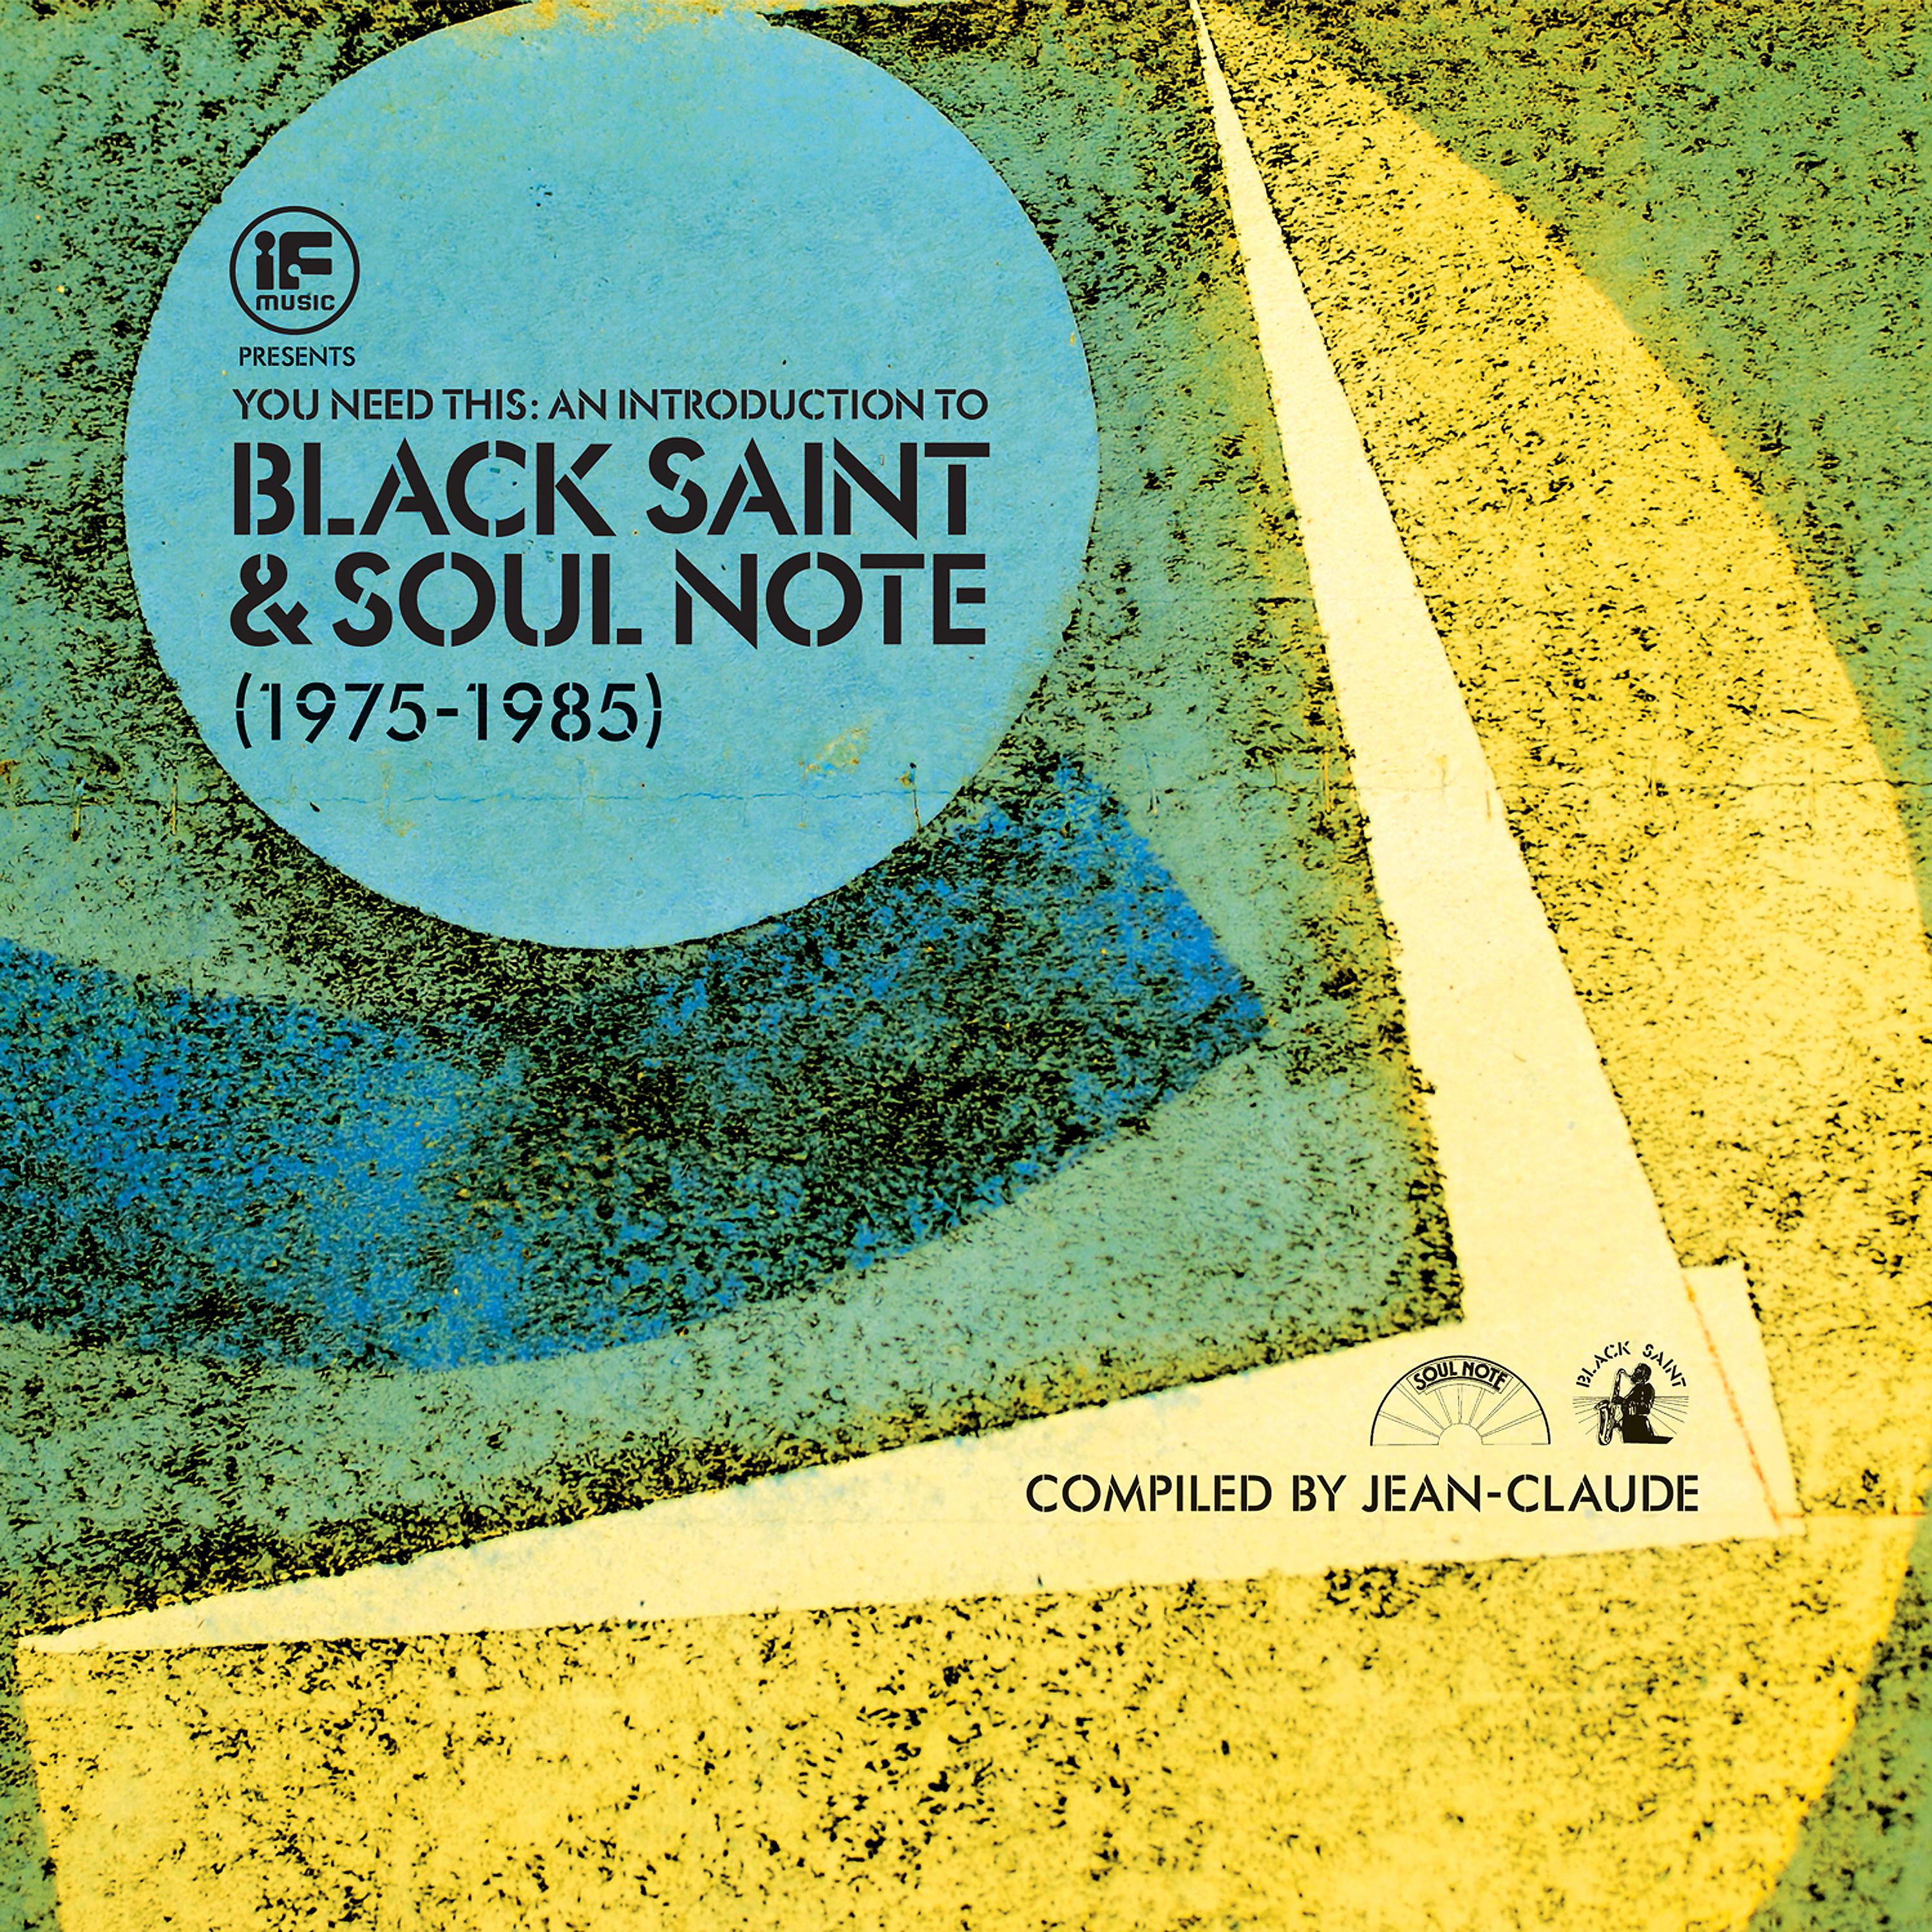 Постер альбома If Music Presents You Need This! An Introduction to Black Saint & Soul Note Records – Compiled by Jean-Claude